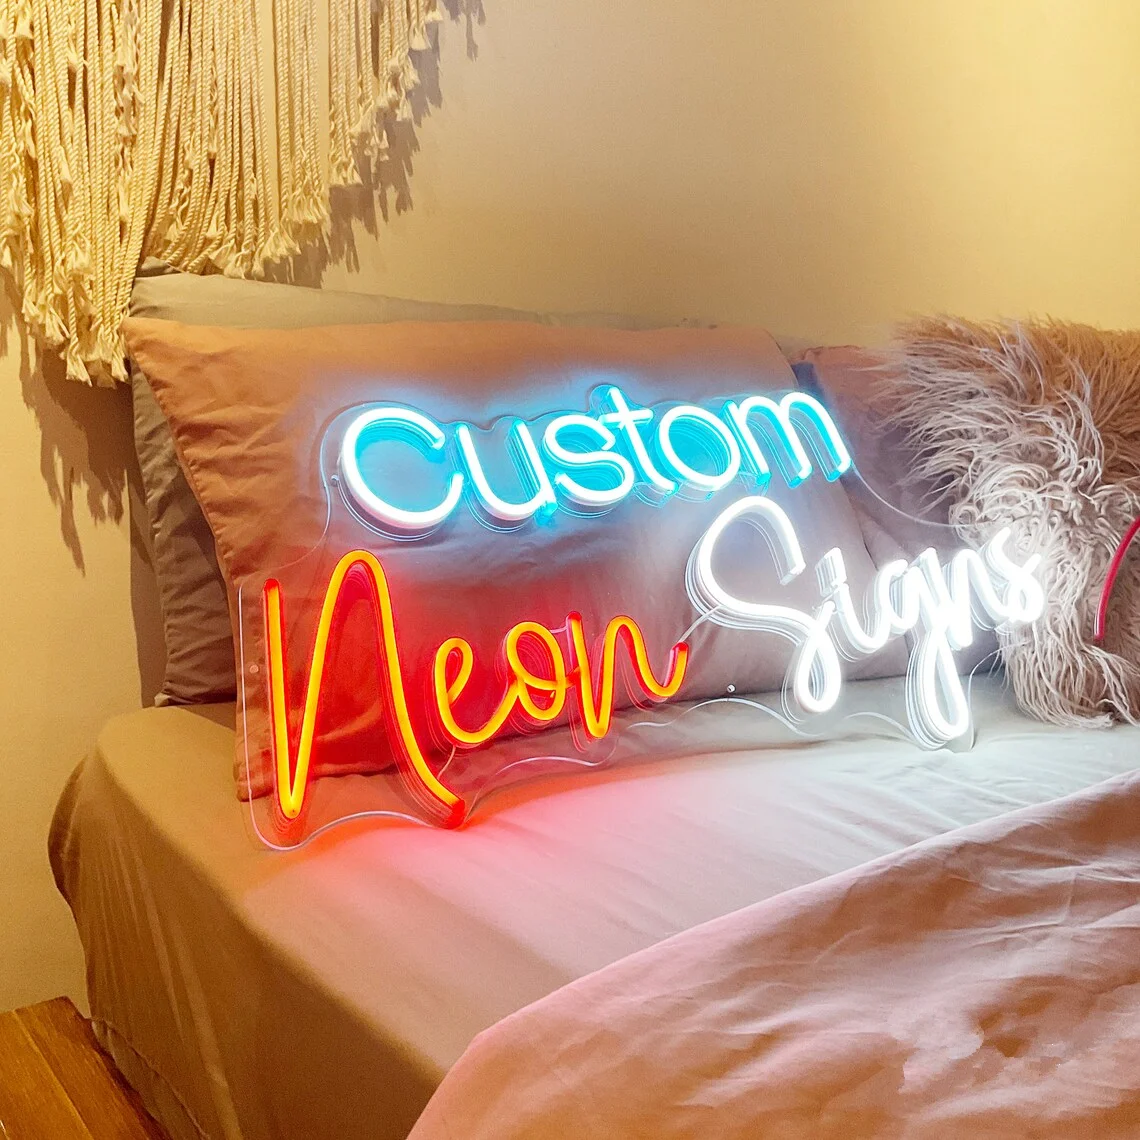 Custom Neon Sign Night Dimmable Led Neon Light Company Logo Business Sign DIY Letters Name Wedding Bedroom Decor Wall Lamp